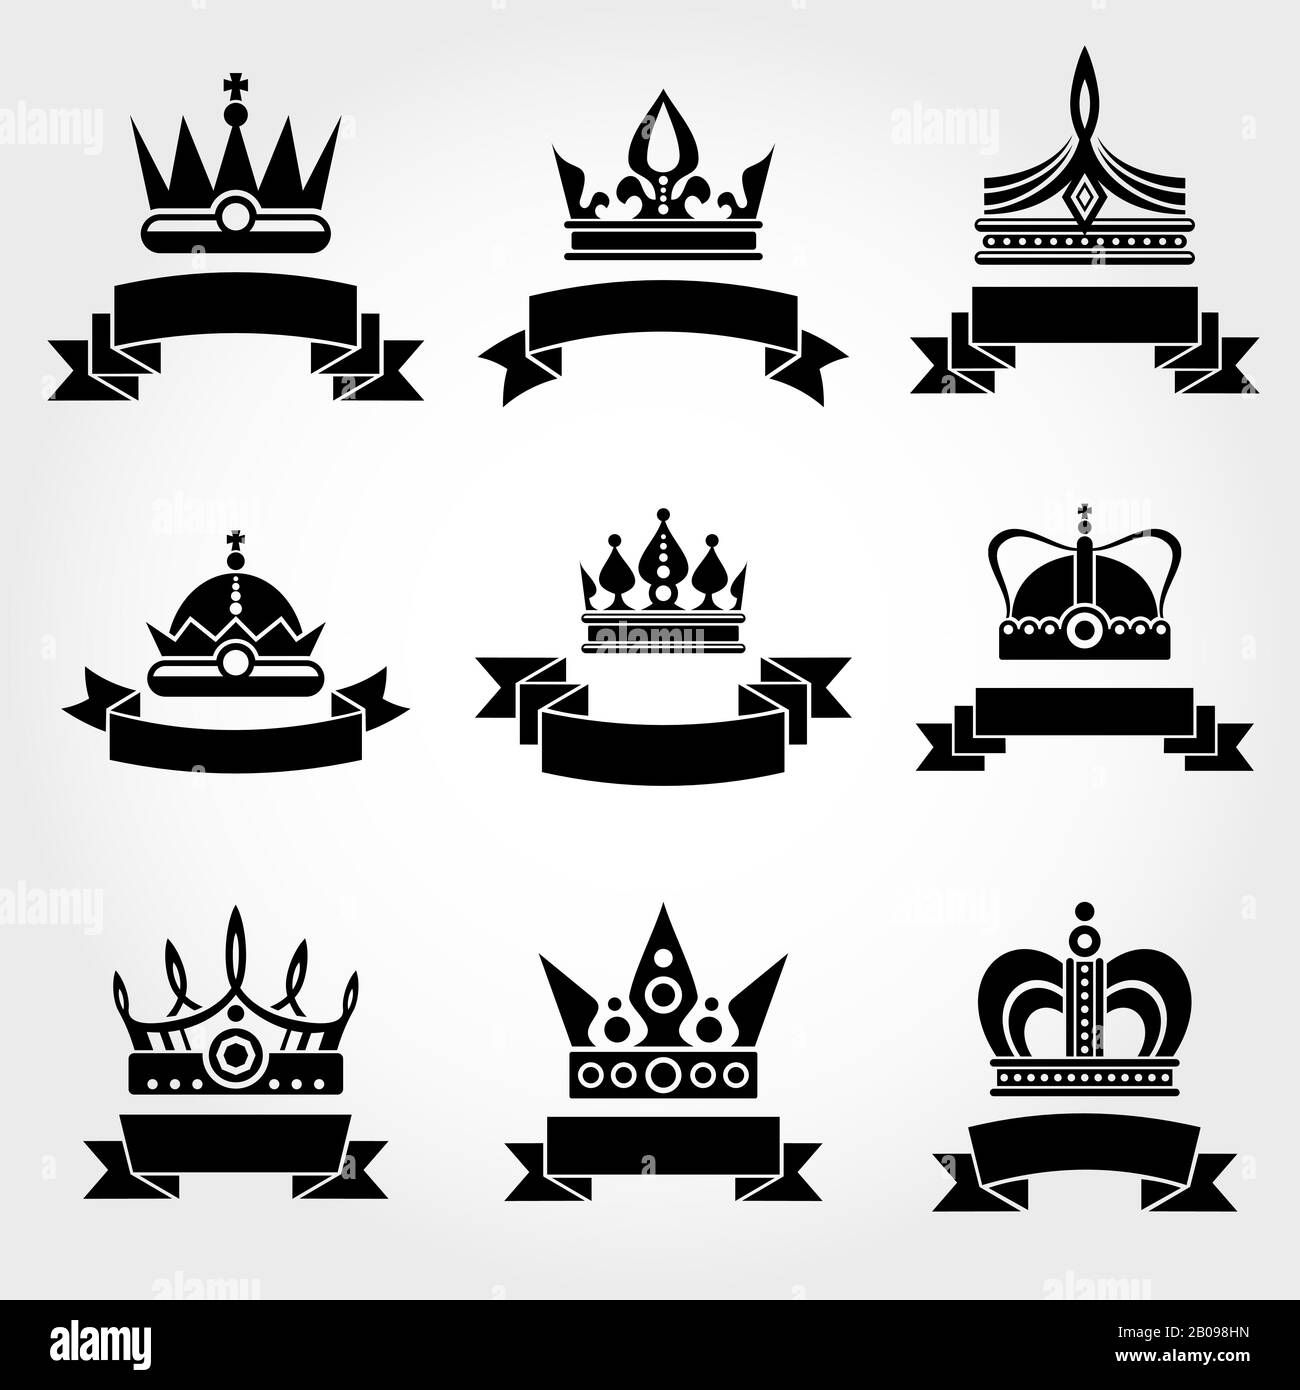 Royal vector crowns and ribbons logo templates set in black. Crown label monochrome design illustration Stock Vector